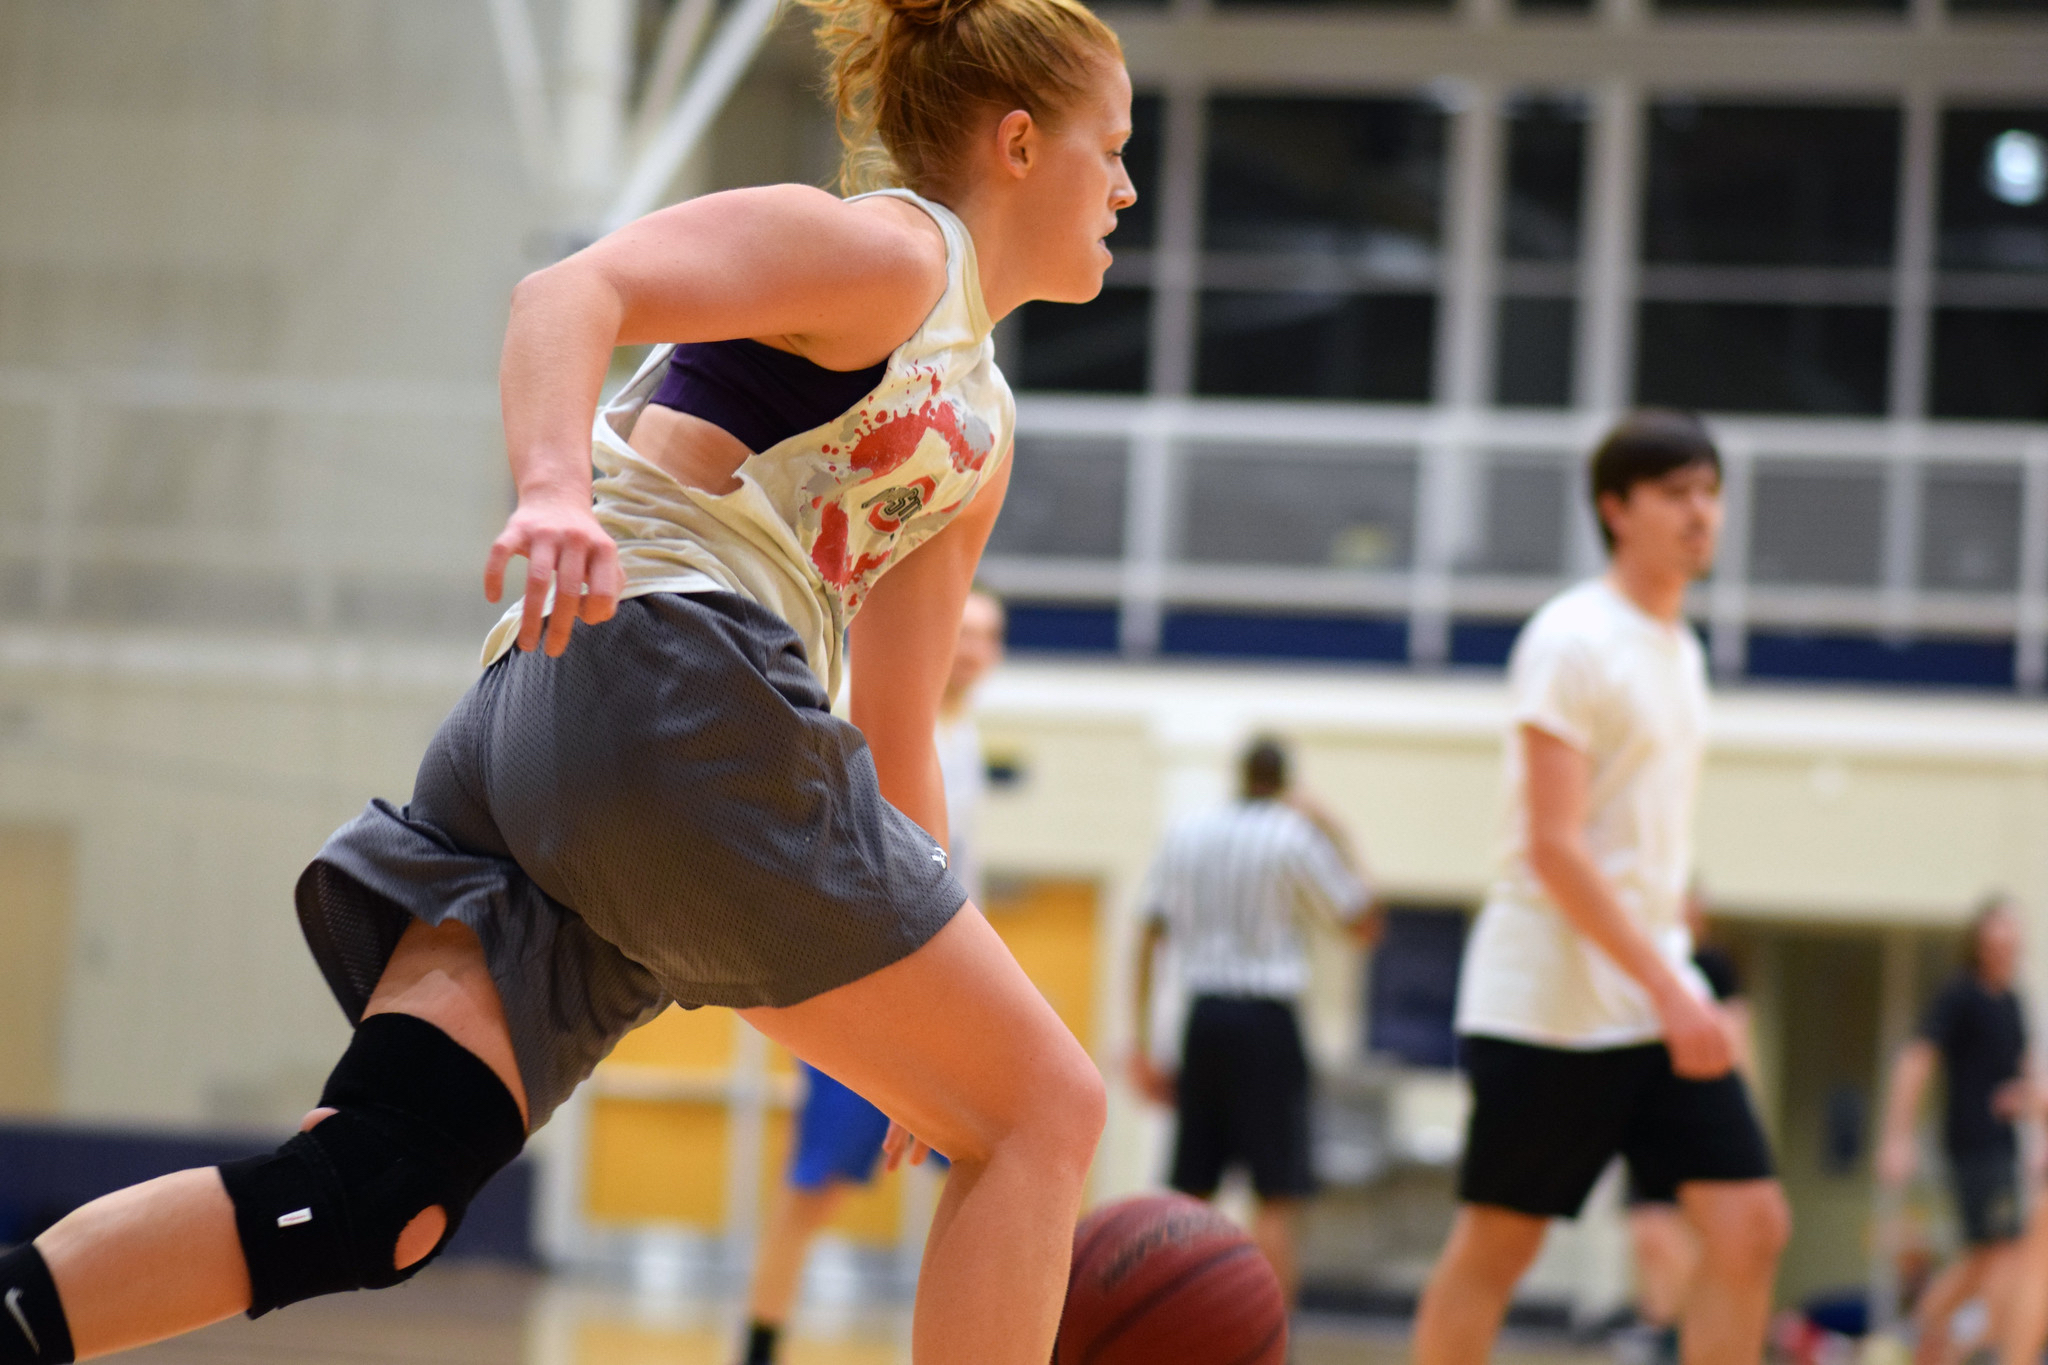 a player dribbling a basketball (image file)